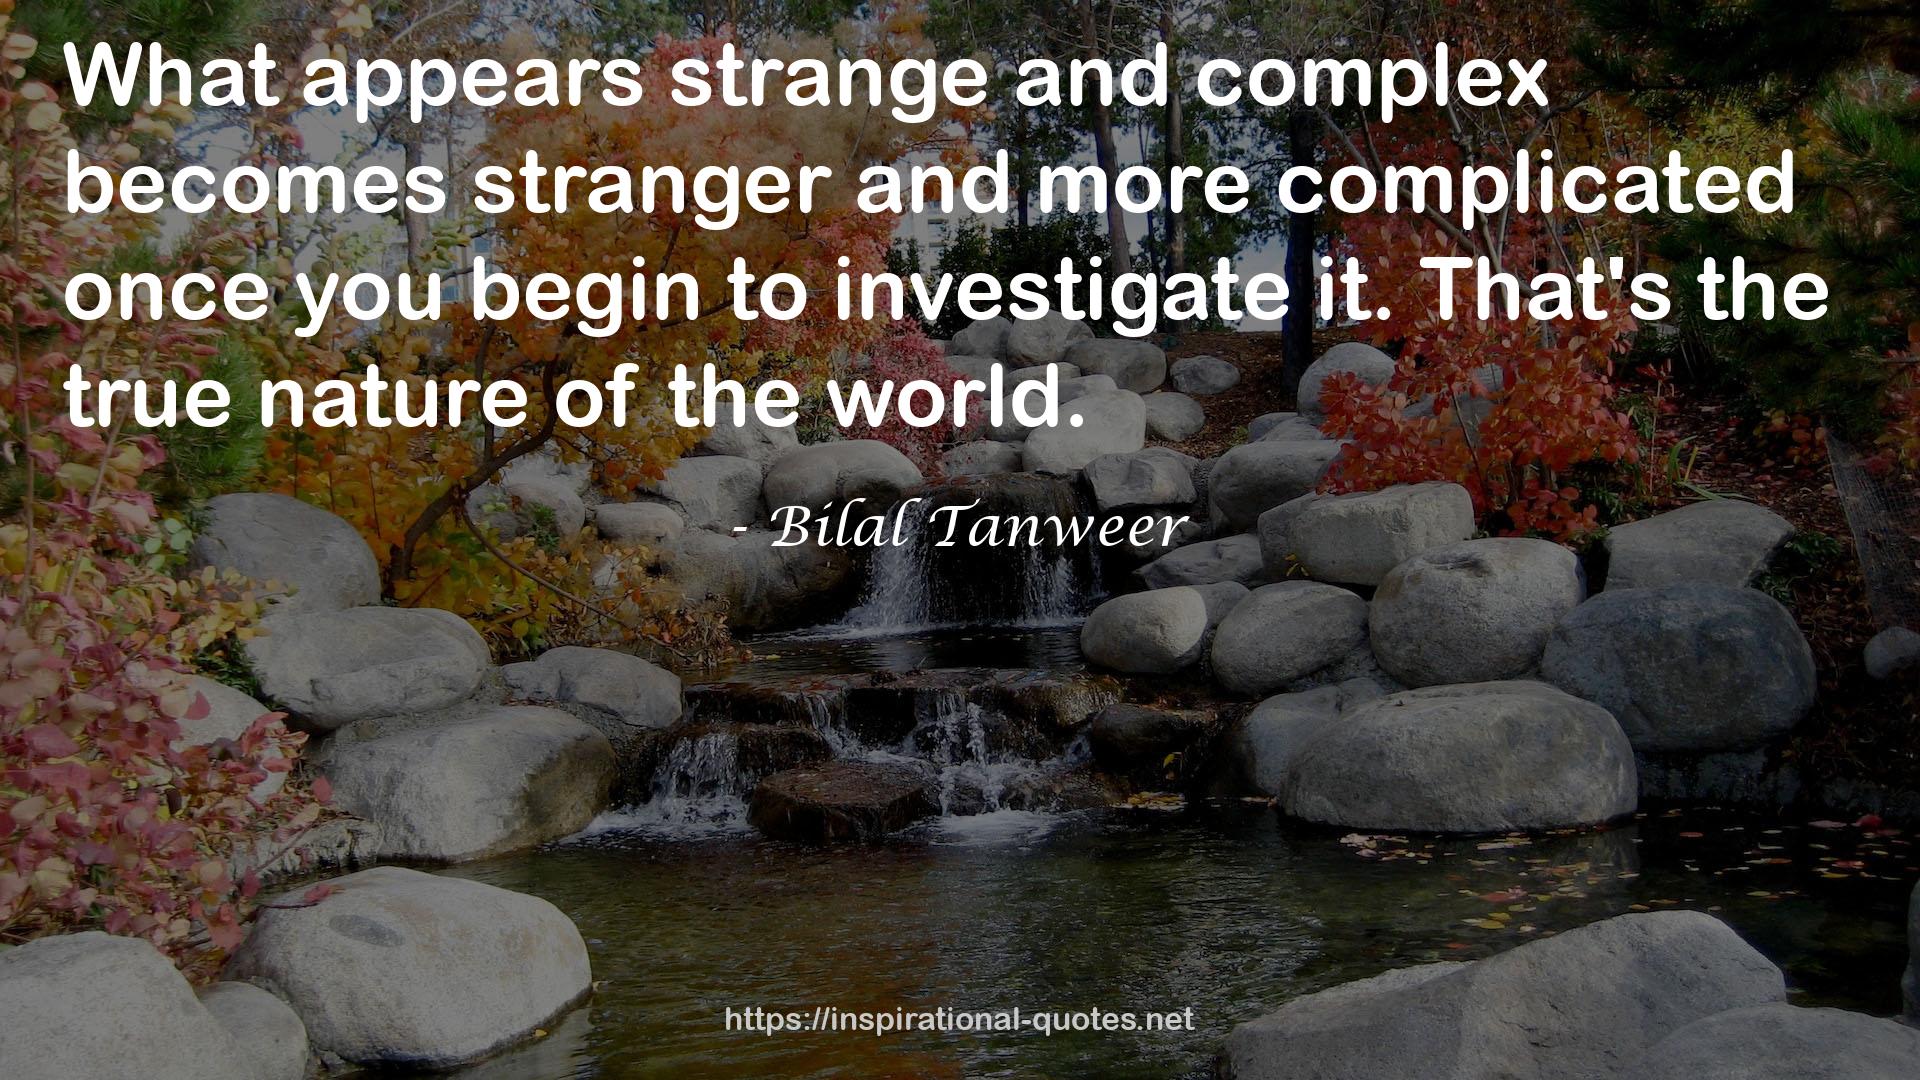 Bilal Tanweer QUOTES